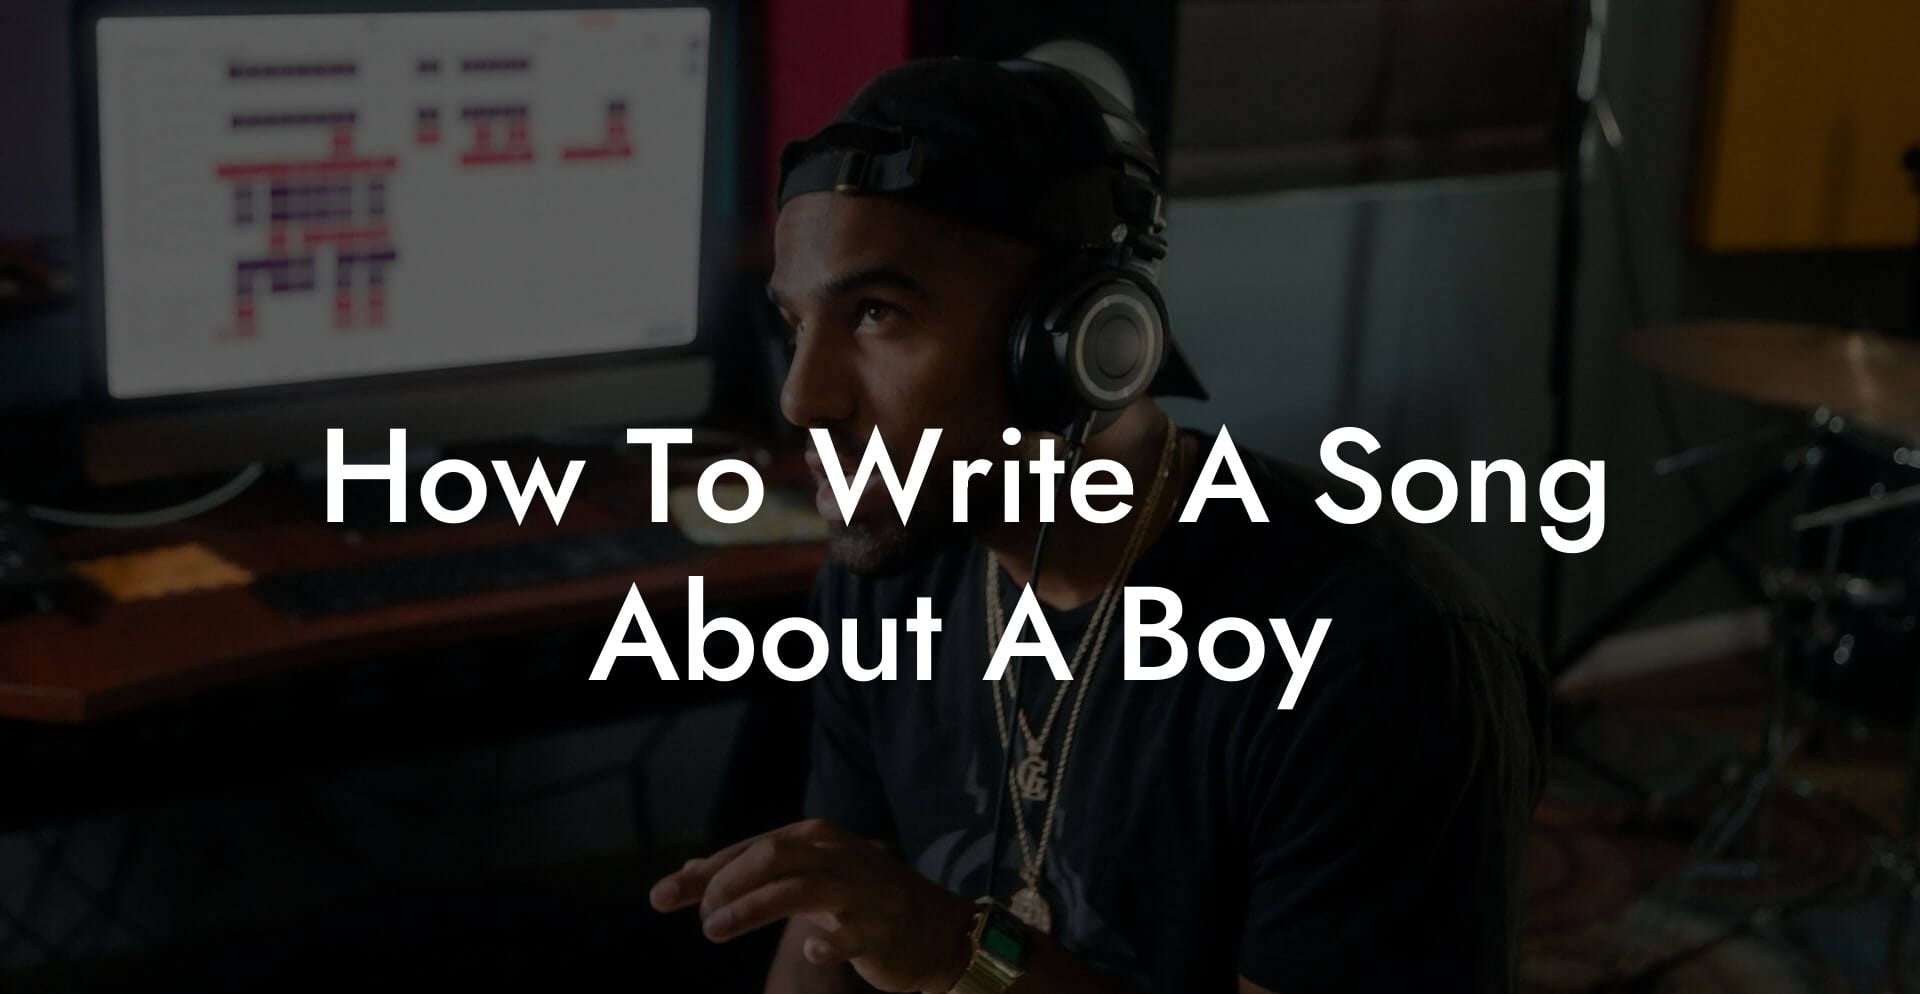 how to write a song about a boy lyric assistant